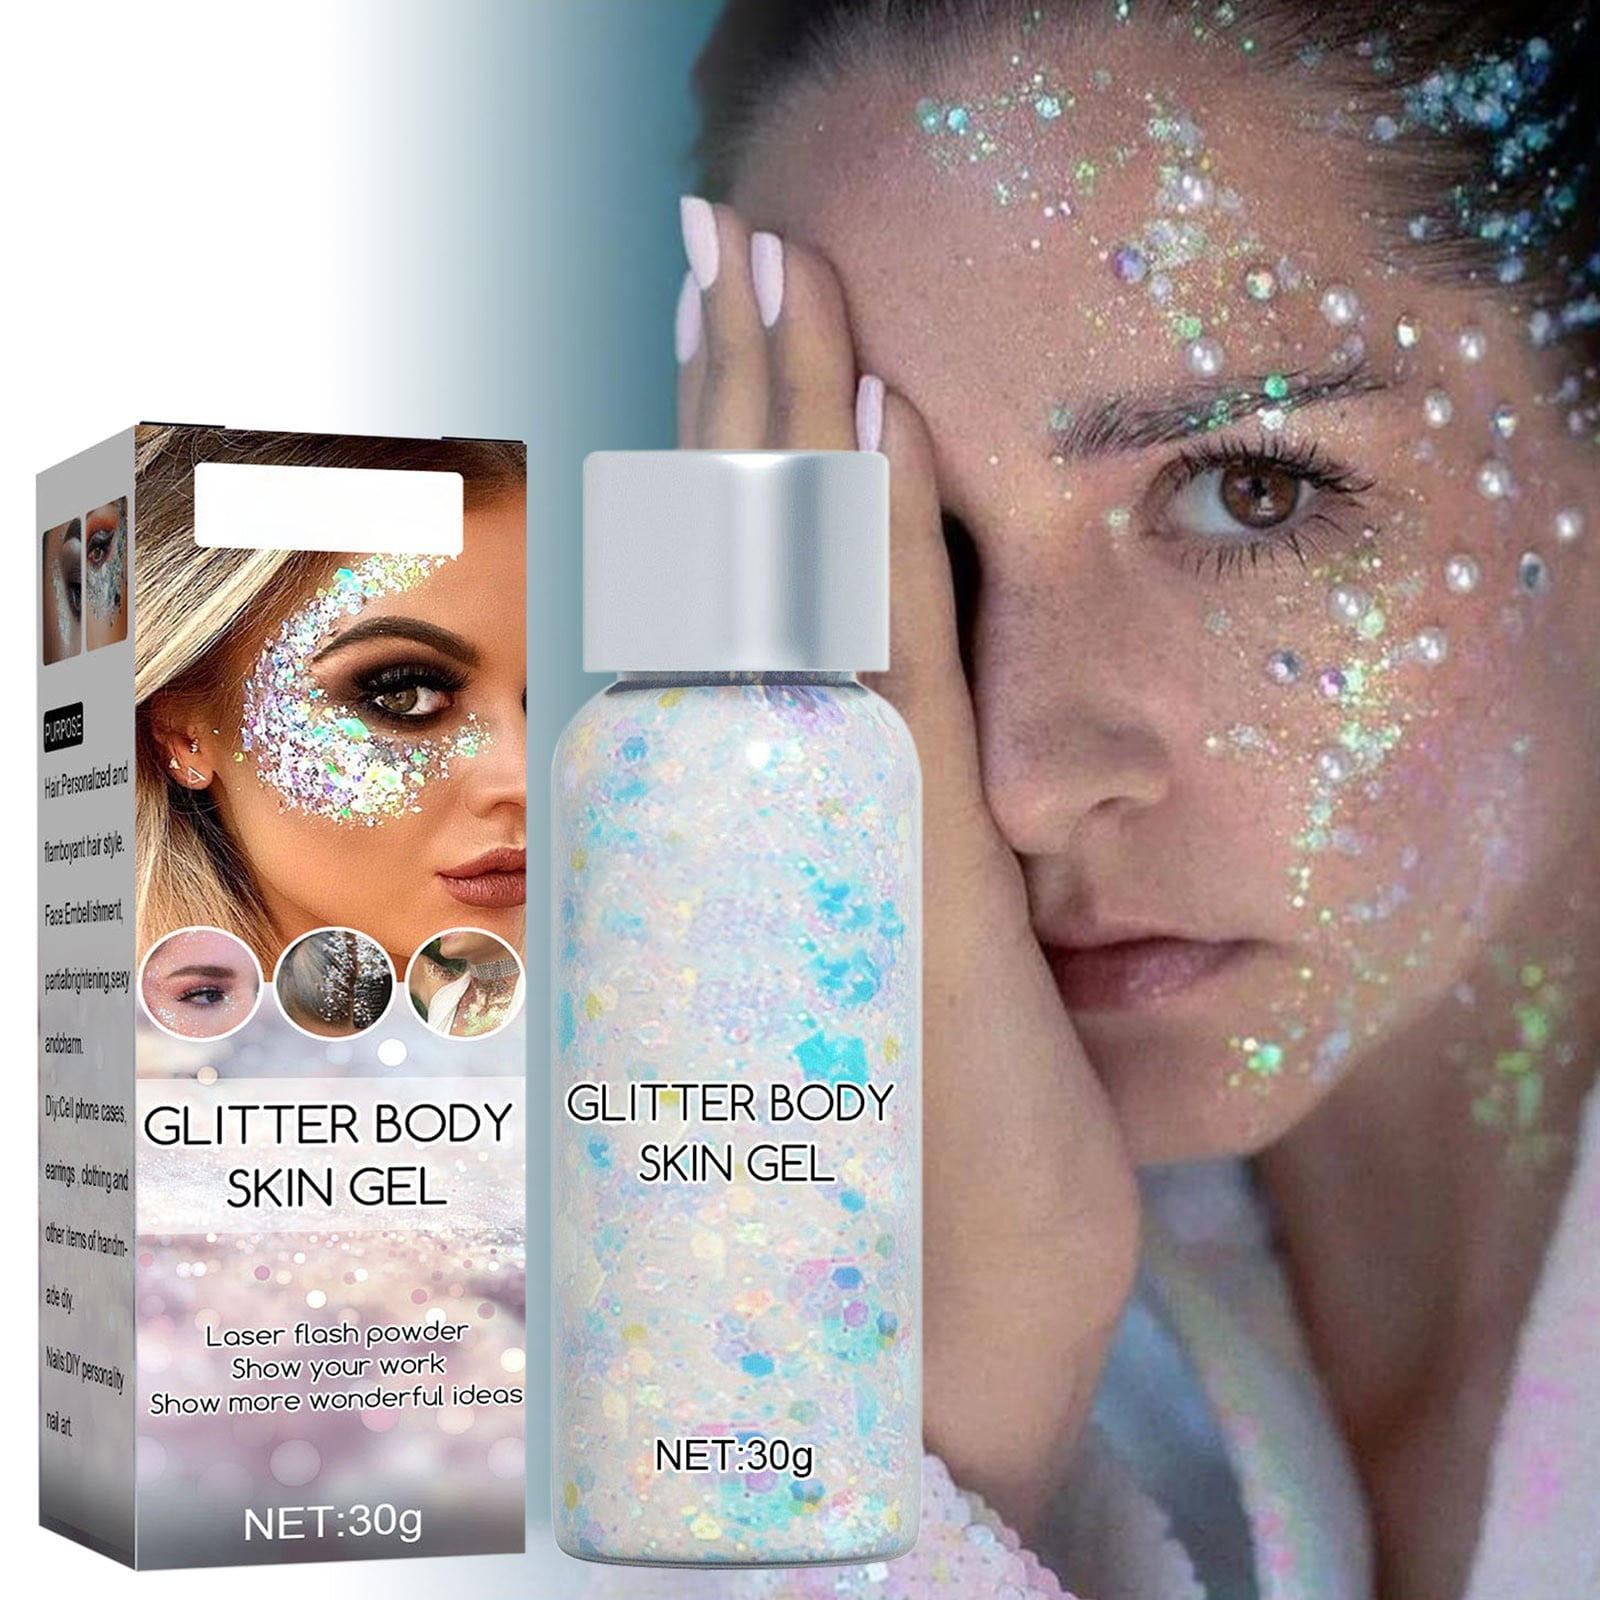 Hyde and Eek! Boutique Mermaid Makeup Kit Water Activated Face Paint Set